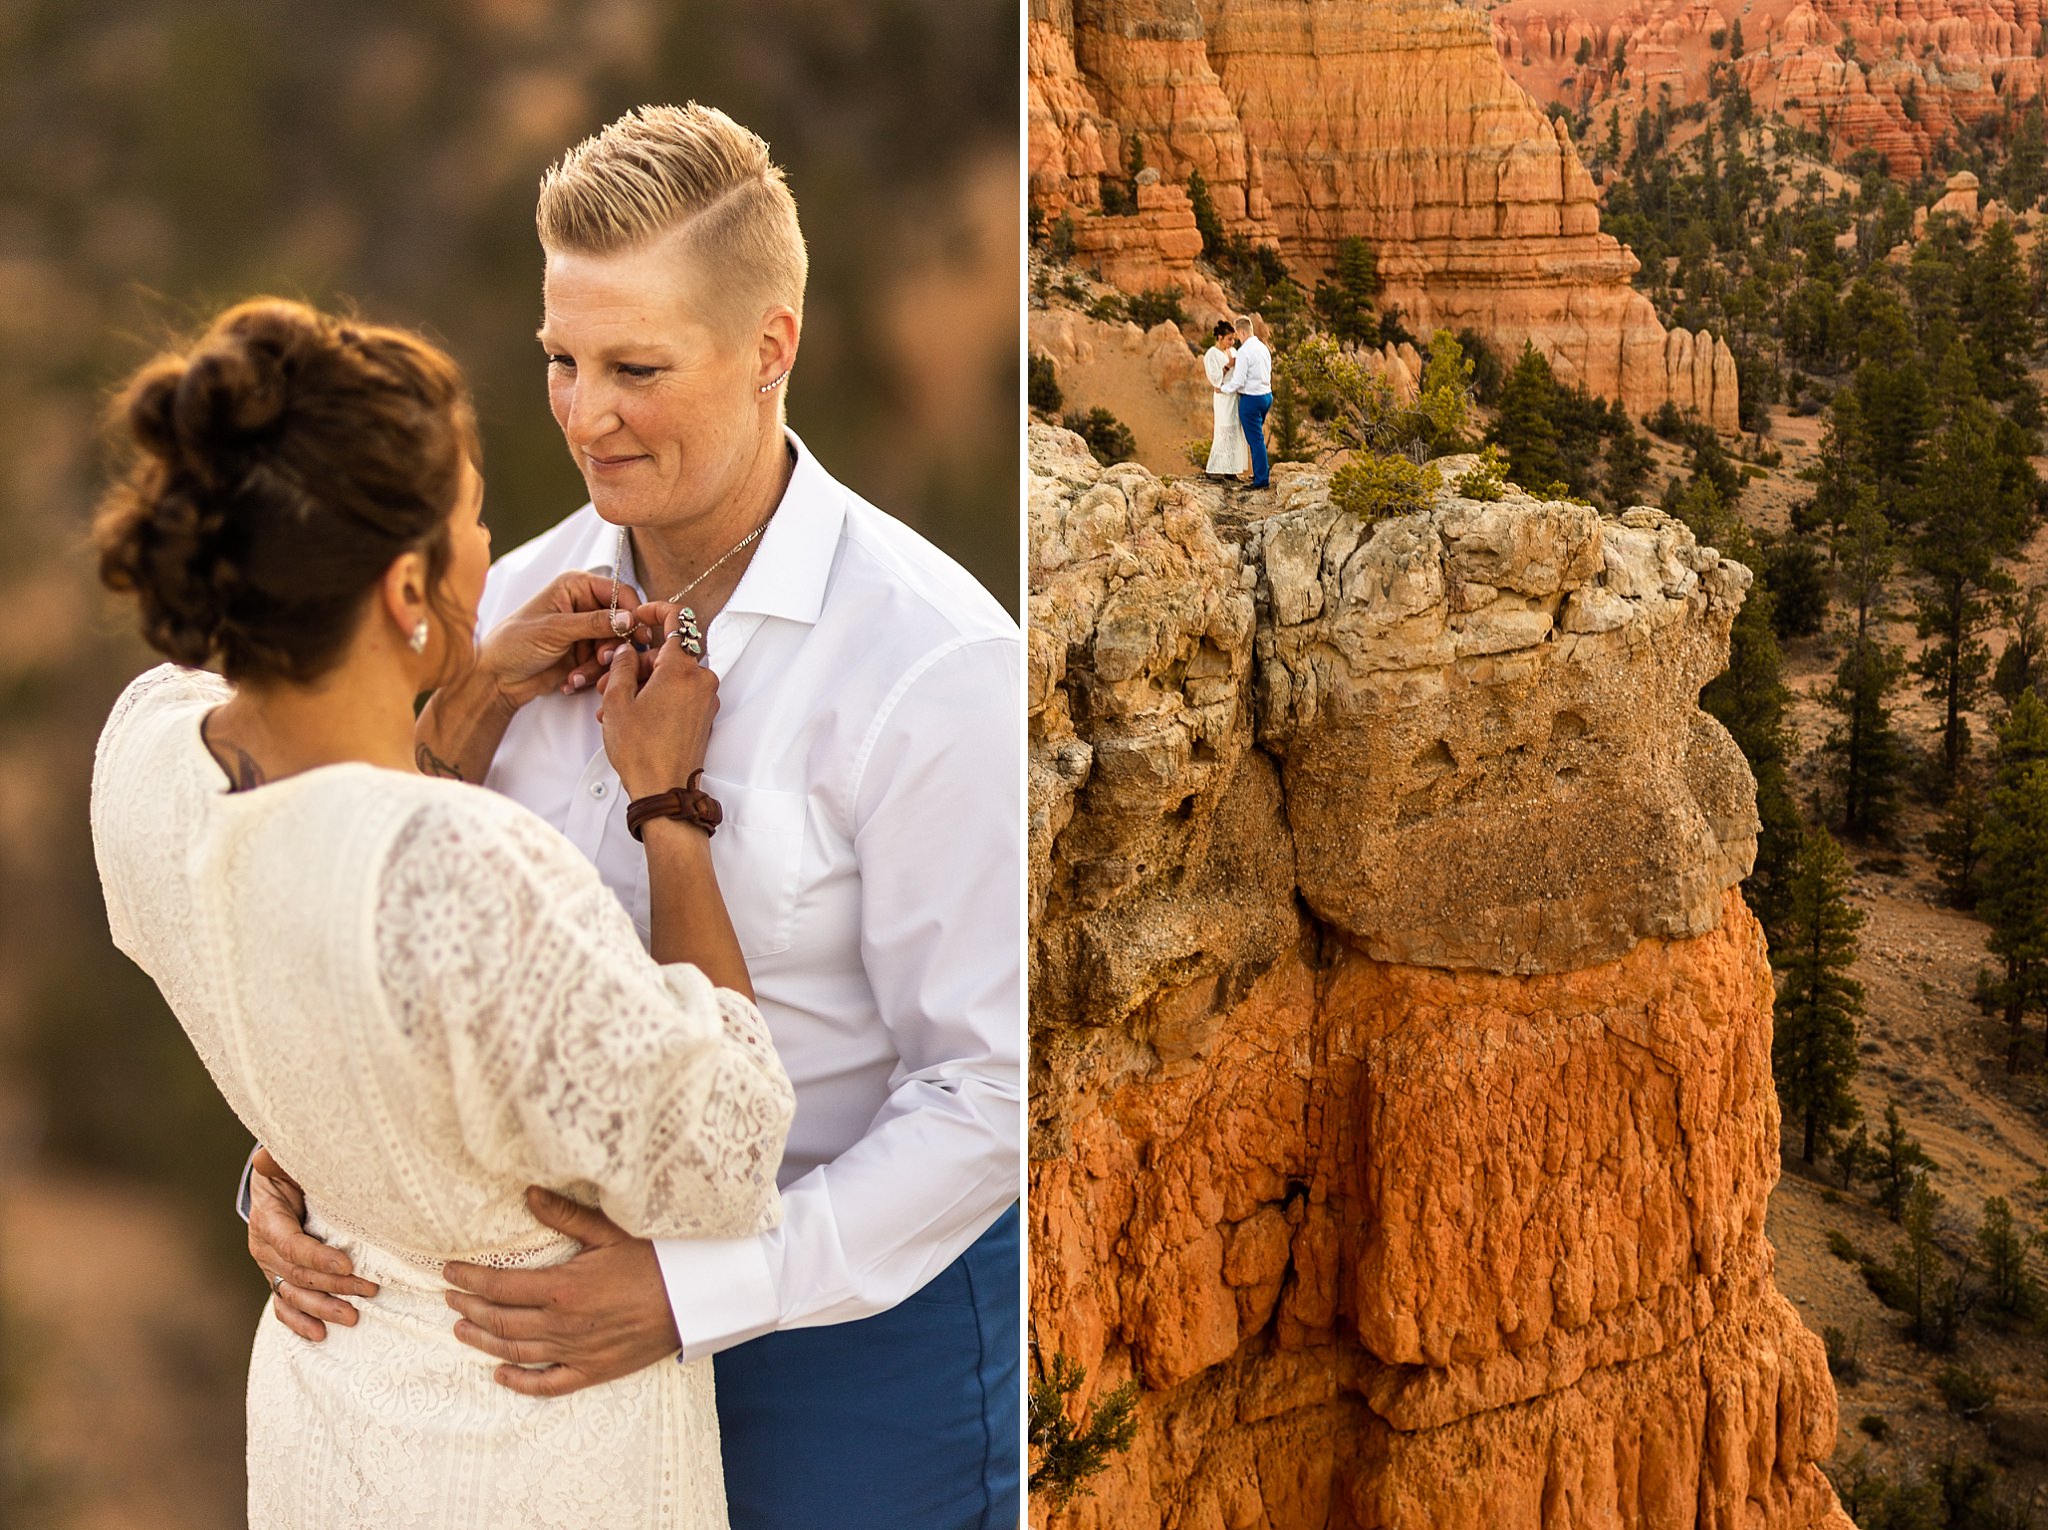 Wedding Portraits in Bryce Canyon